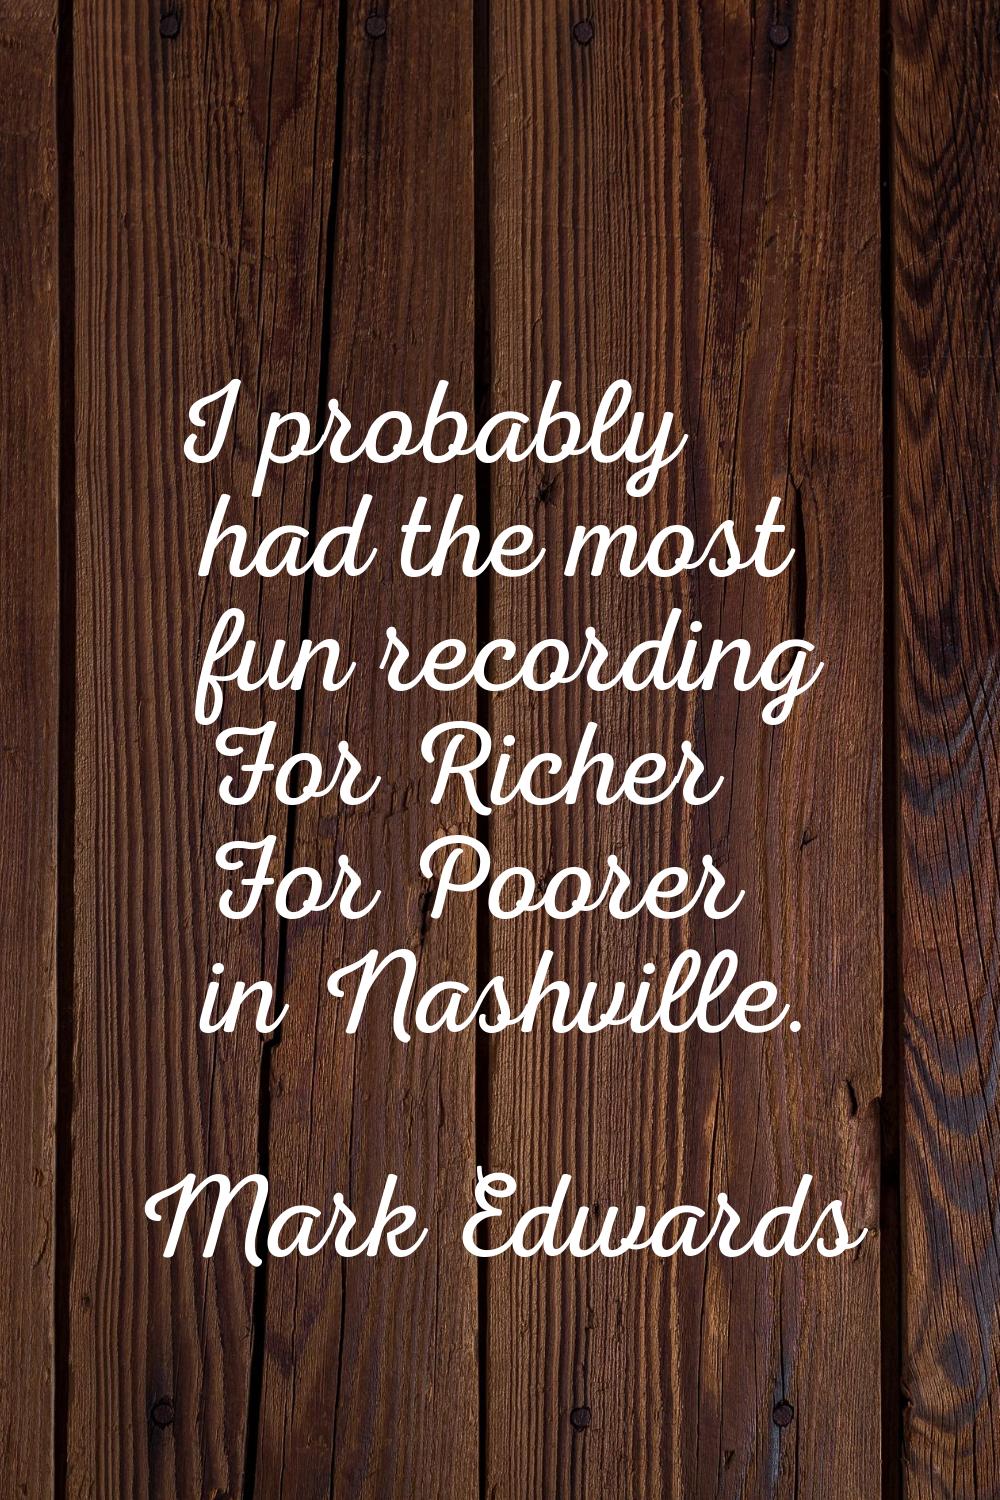 I probably had the most fun recording For Richer For Poorer in Nashville.